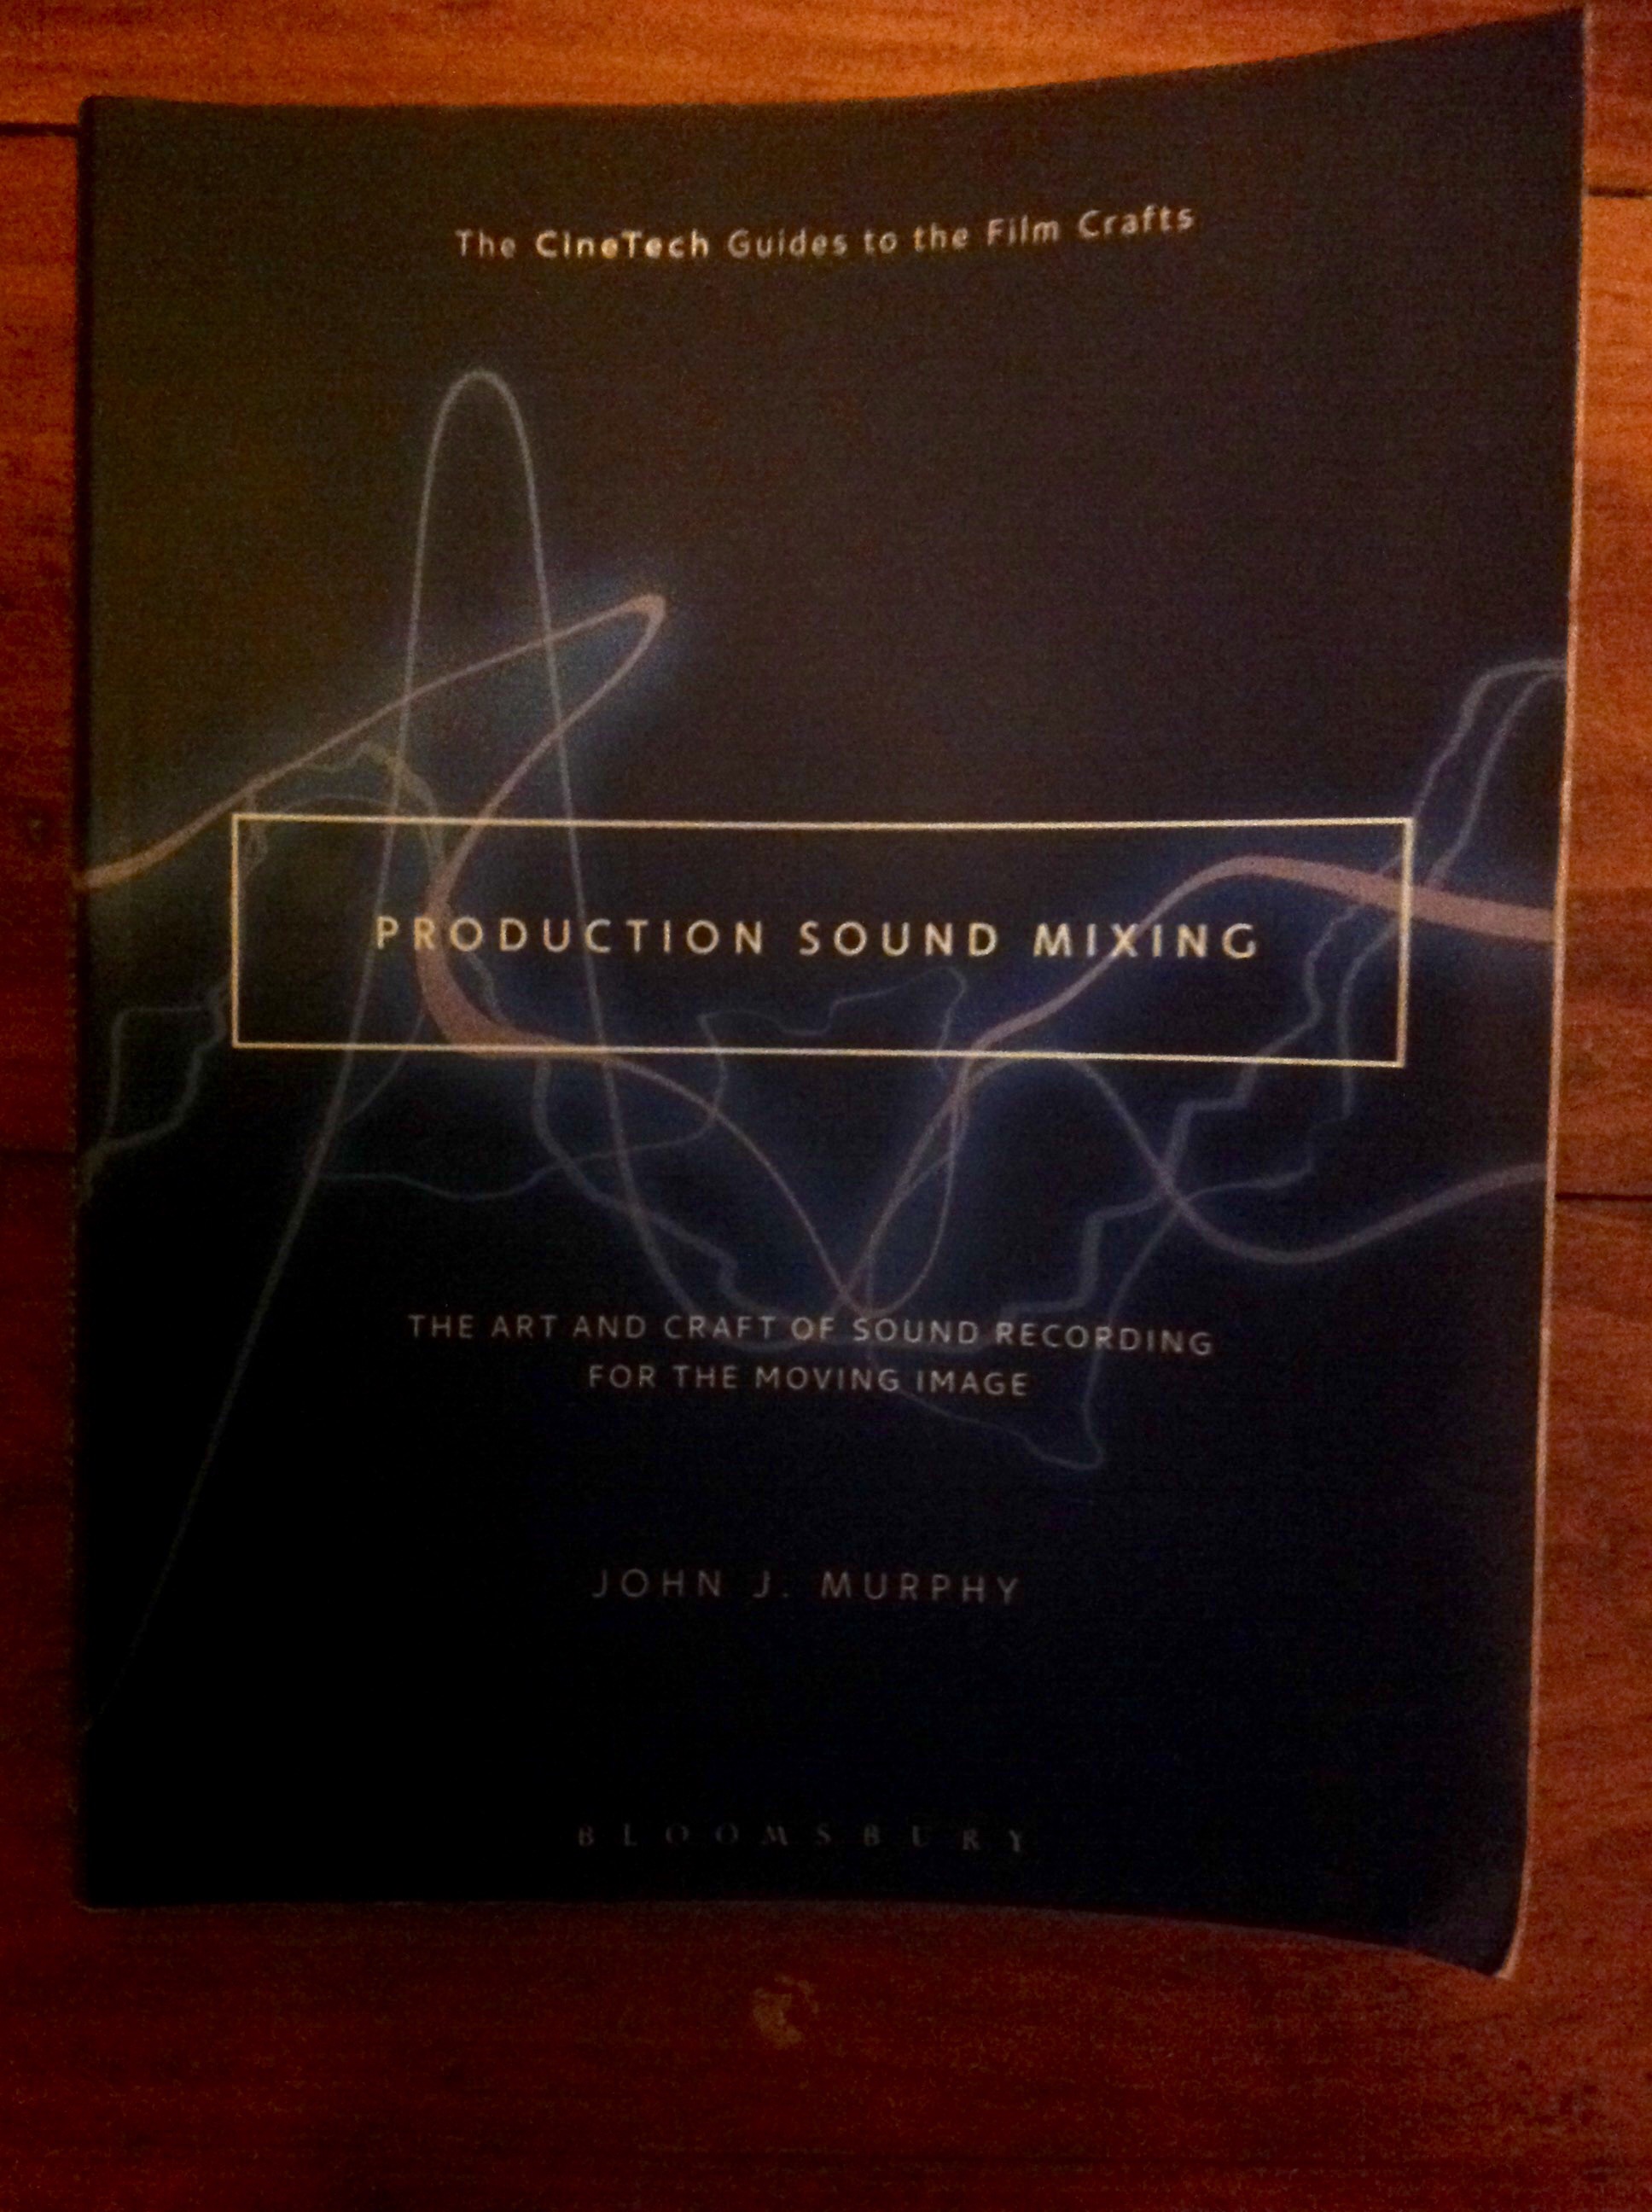 Production Sound Mixing book